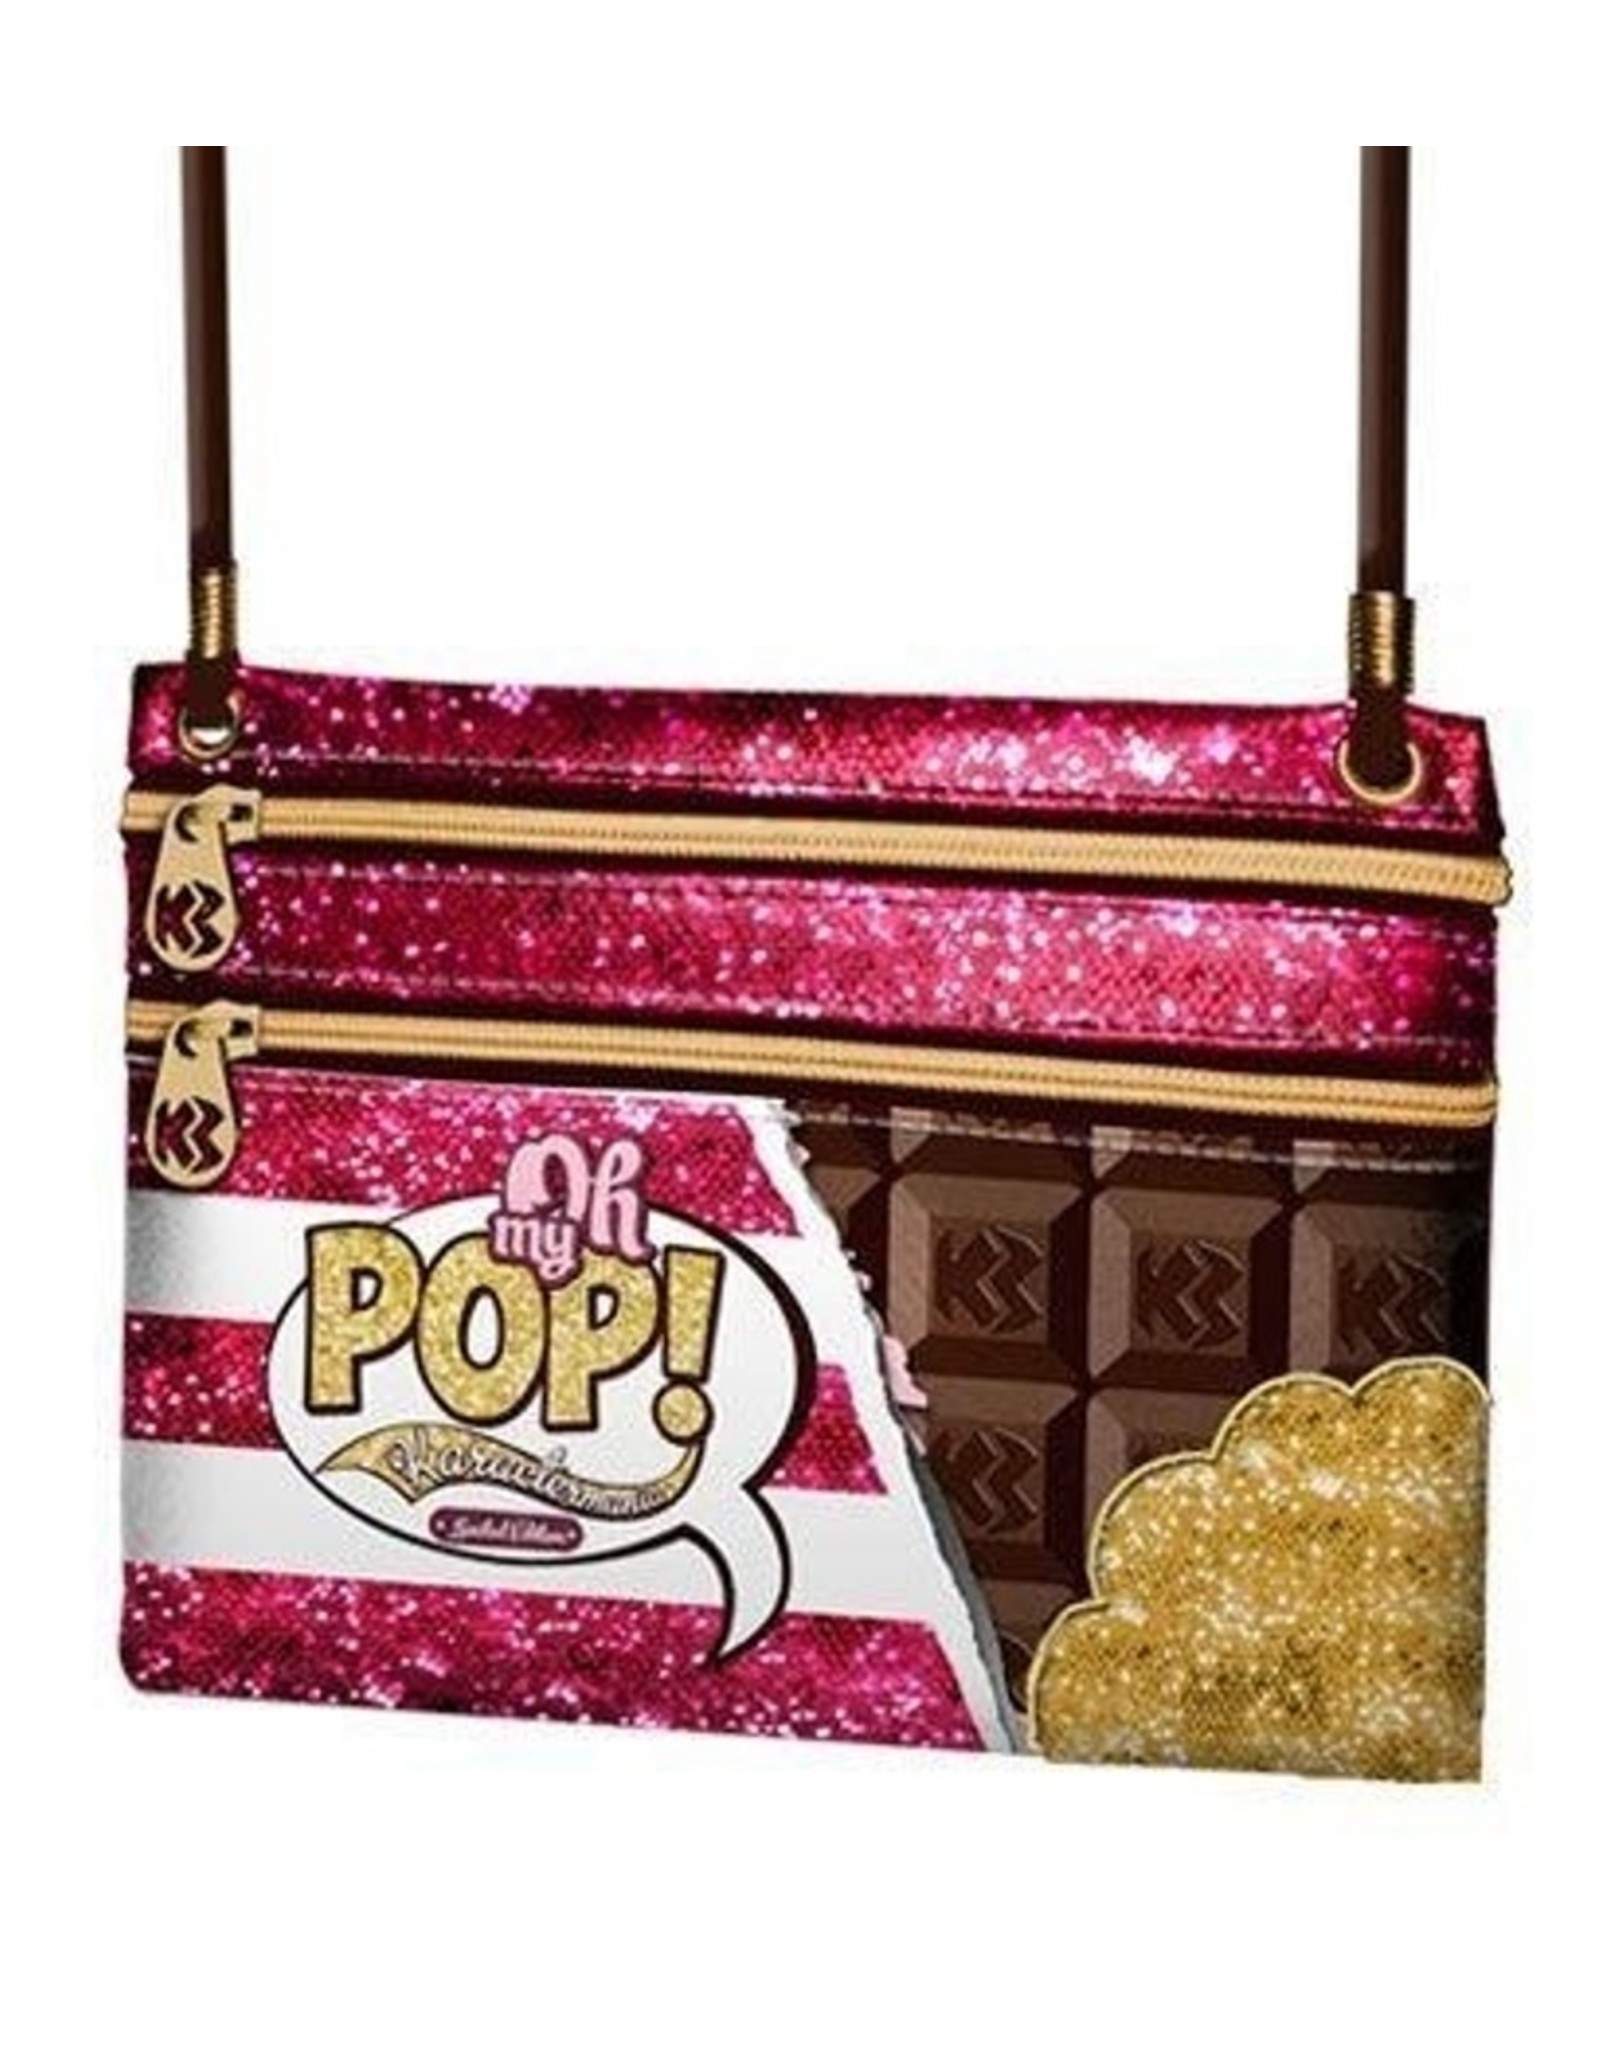 Oh my Pop! Fantasy bags and wallets - Oh My Pop! Chocolate shoulder bag